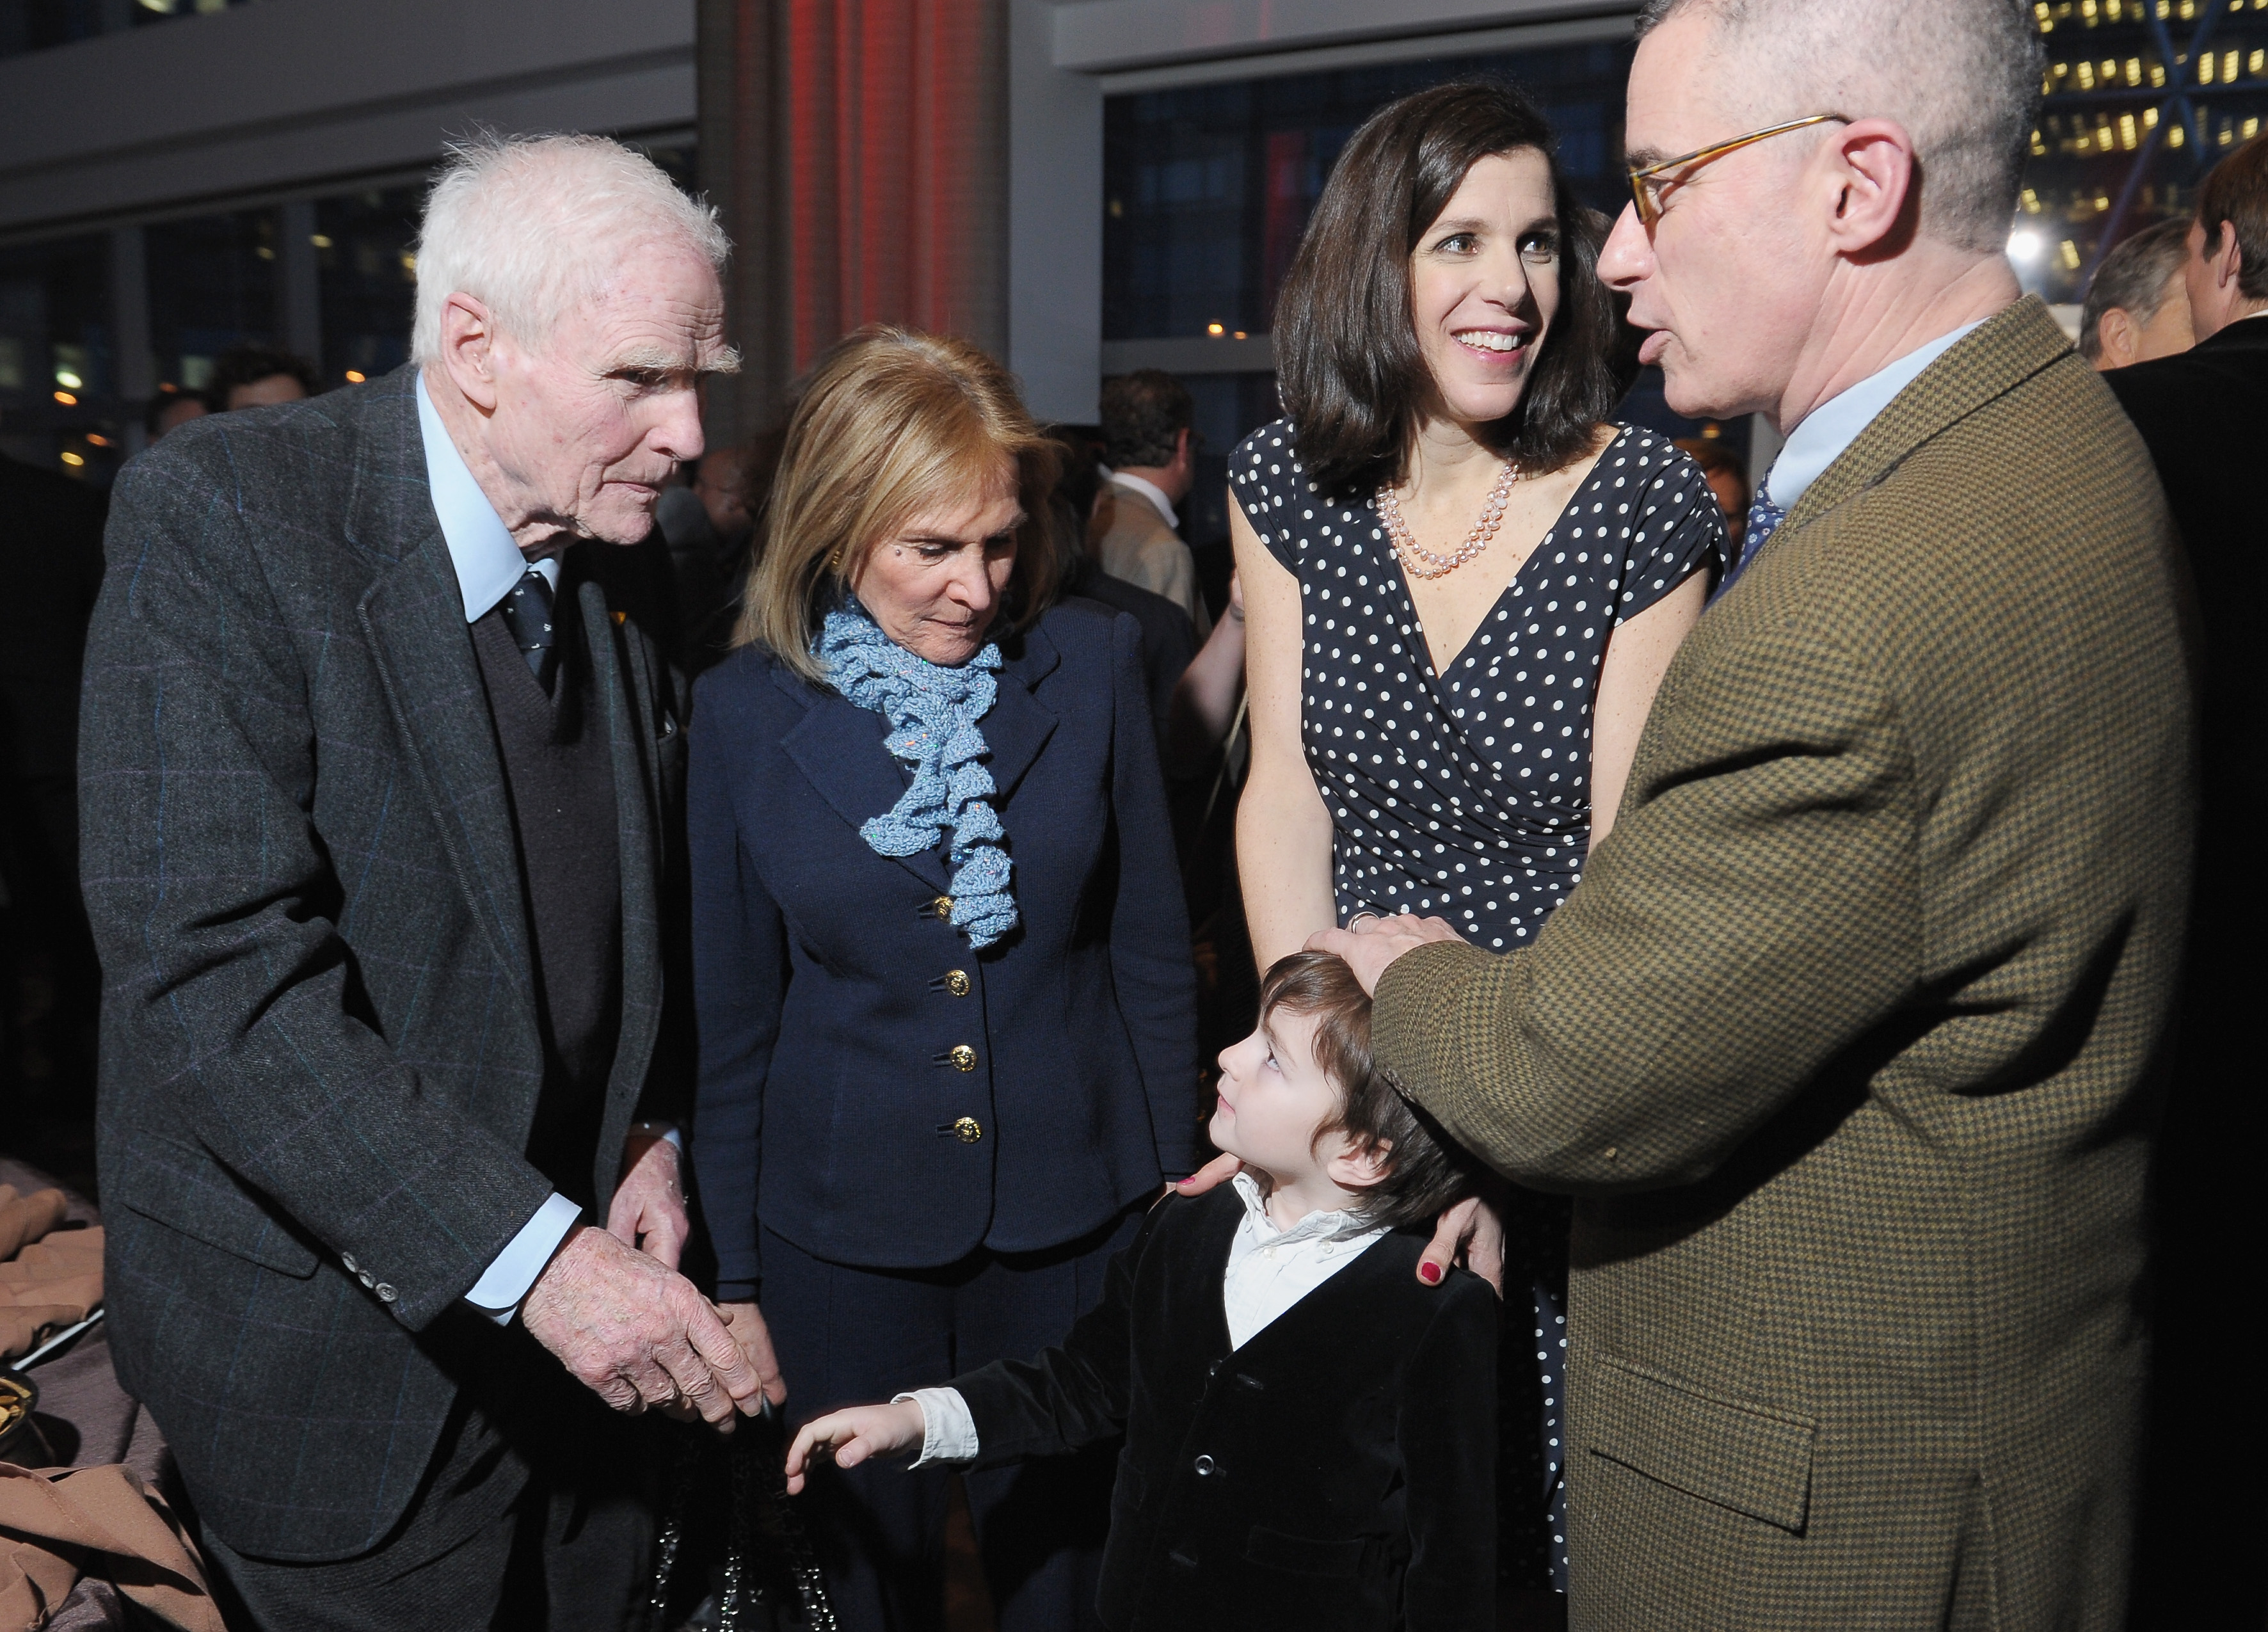 Former NJ Governor Brendan Byrne, his wife Ruthi Zinn Byrne, filmmaker Alexandra Pelosi, her son Thomas Vos and film subject, former NJ Governor Jim McGreevey at a New York premiere of the HBO documentary Fall to Grace last year (Photo by Michael Loccisano/Getty Images for HBO)